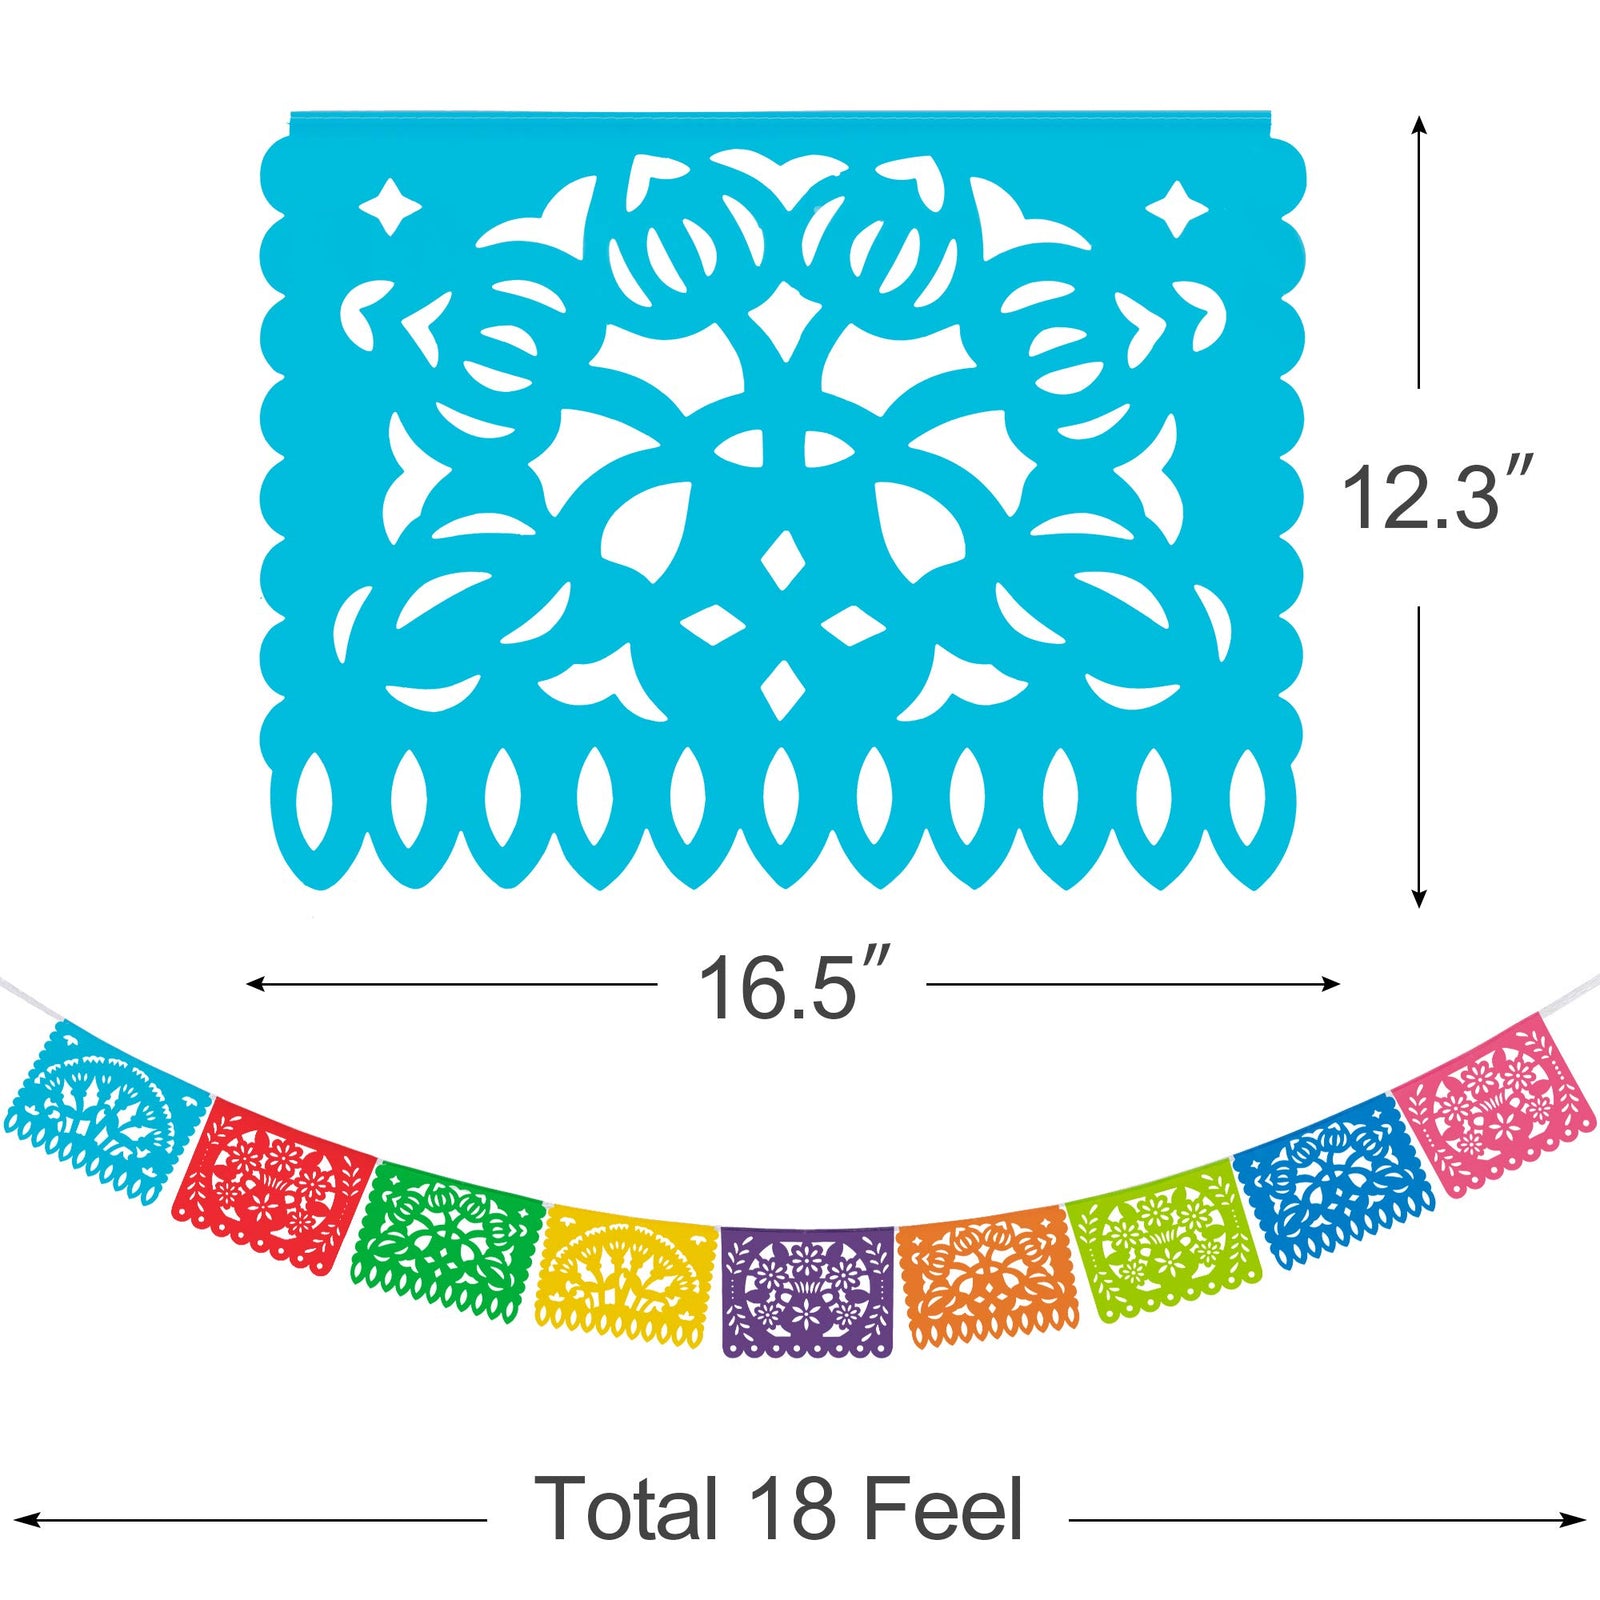 HOOJO 5 Packs 82 Ft Mexican Party Banners, Papel Picado Banner, Cino de Mayo, Fiesta Party Decorations, Dia De Los Muertos Decor, Day of The Dead Decorations, 12 Patterns 82 Feet Long in Total